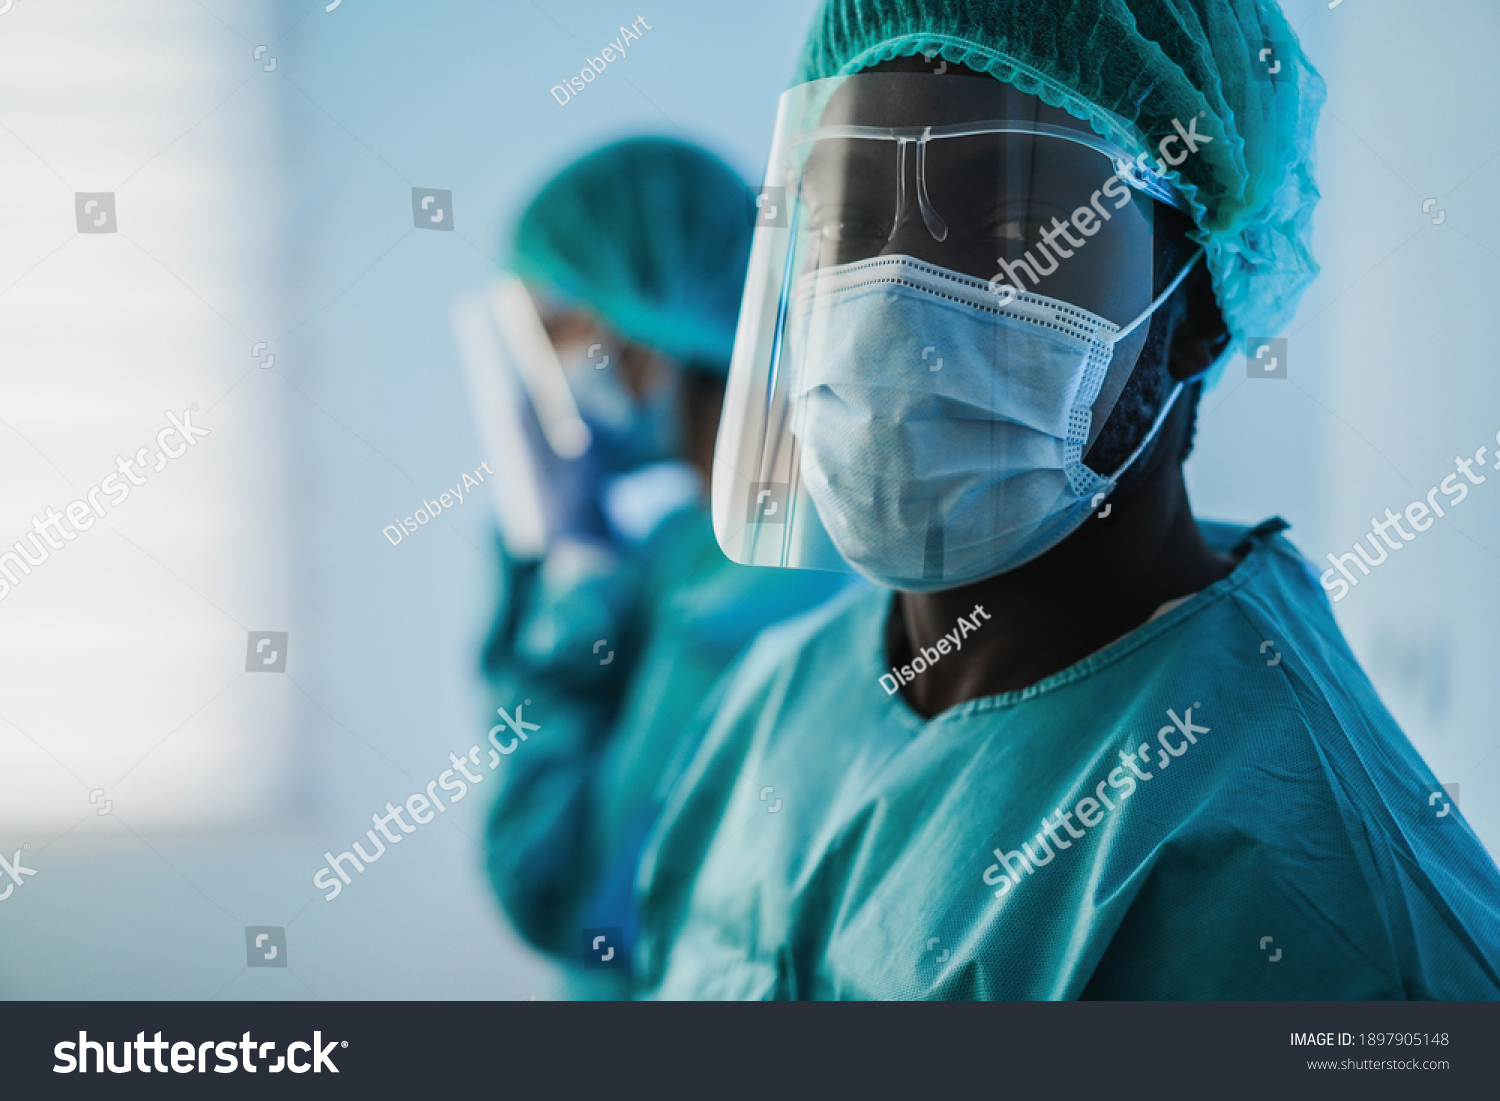 Men doctors at work inside hospital during coronavirus outbreak - Medical worker on Covid-19 crisis wearing face protective mask - Focus on mask #1897905148